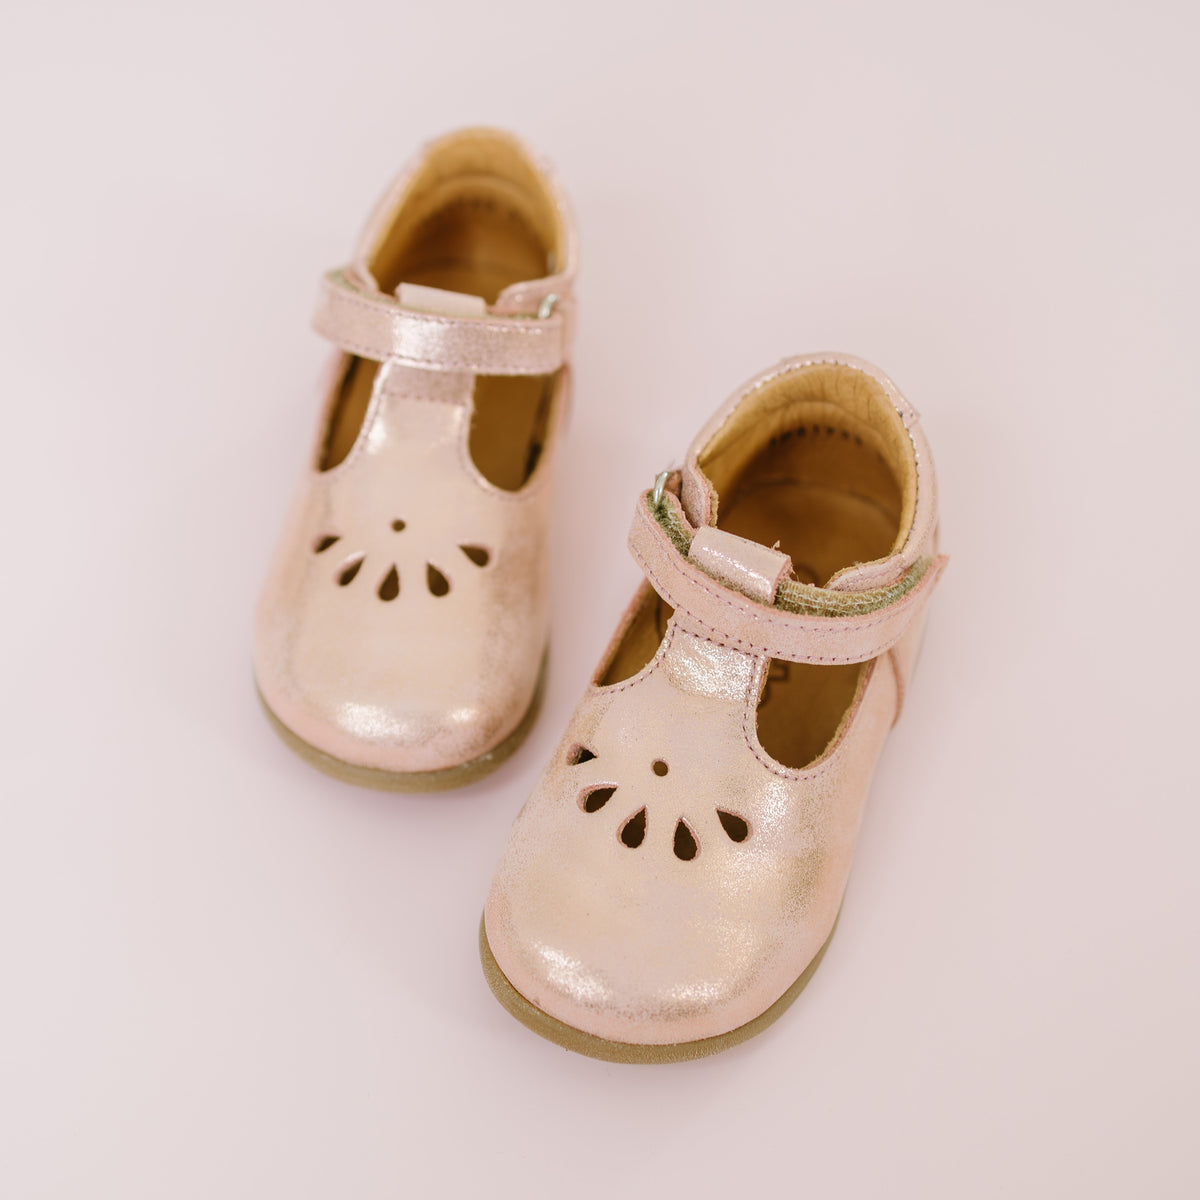 Kid's Footwear For Sale Online nationwide shipping